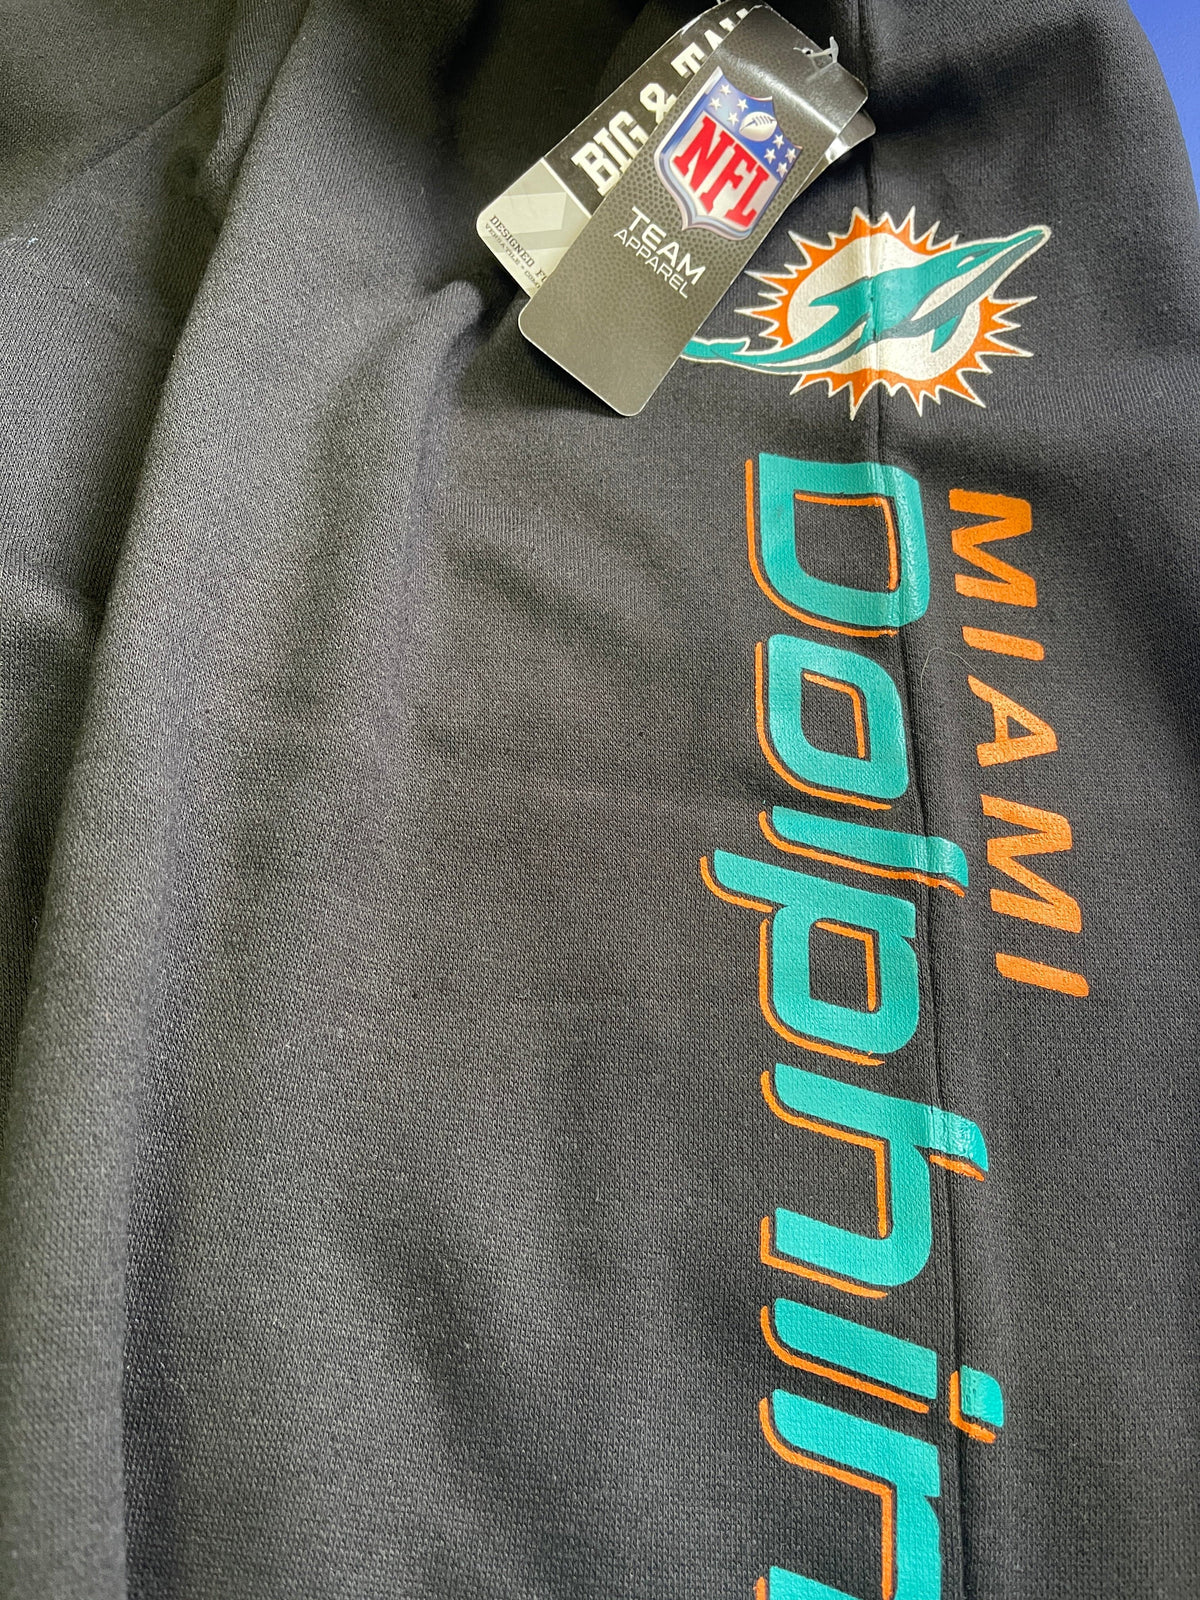 NFL Miami Dolphins Majestic Workout Trousers/Joggers Men's 3X-Large NWT